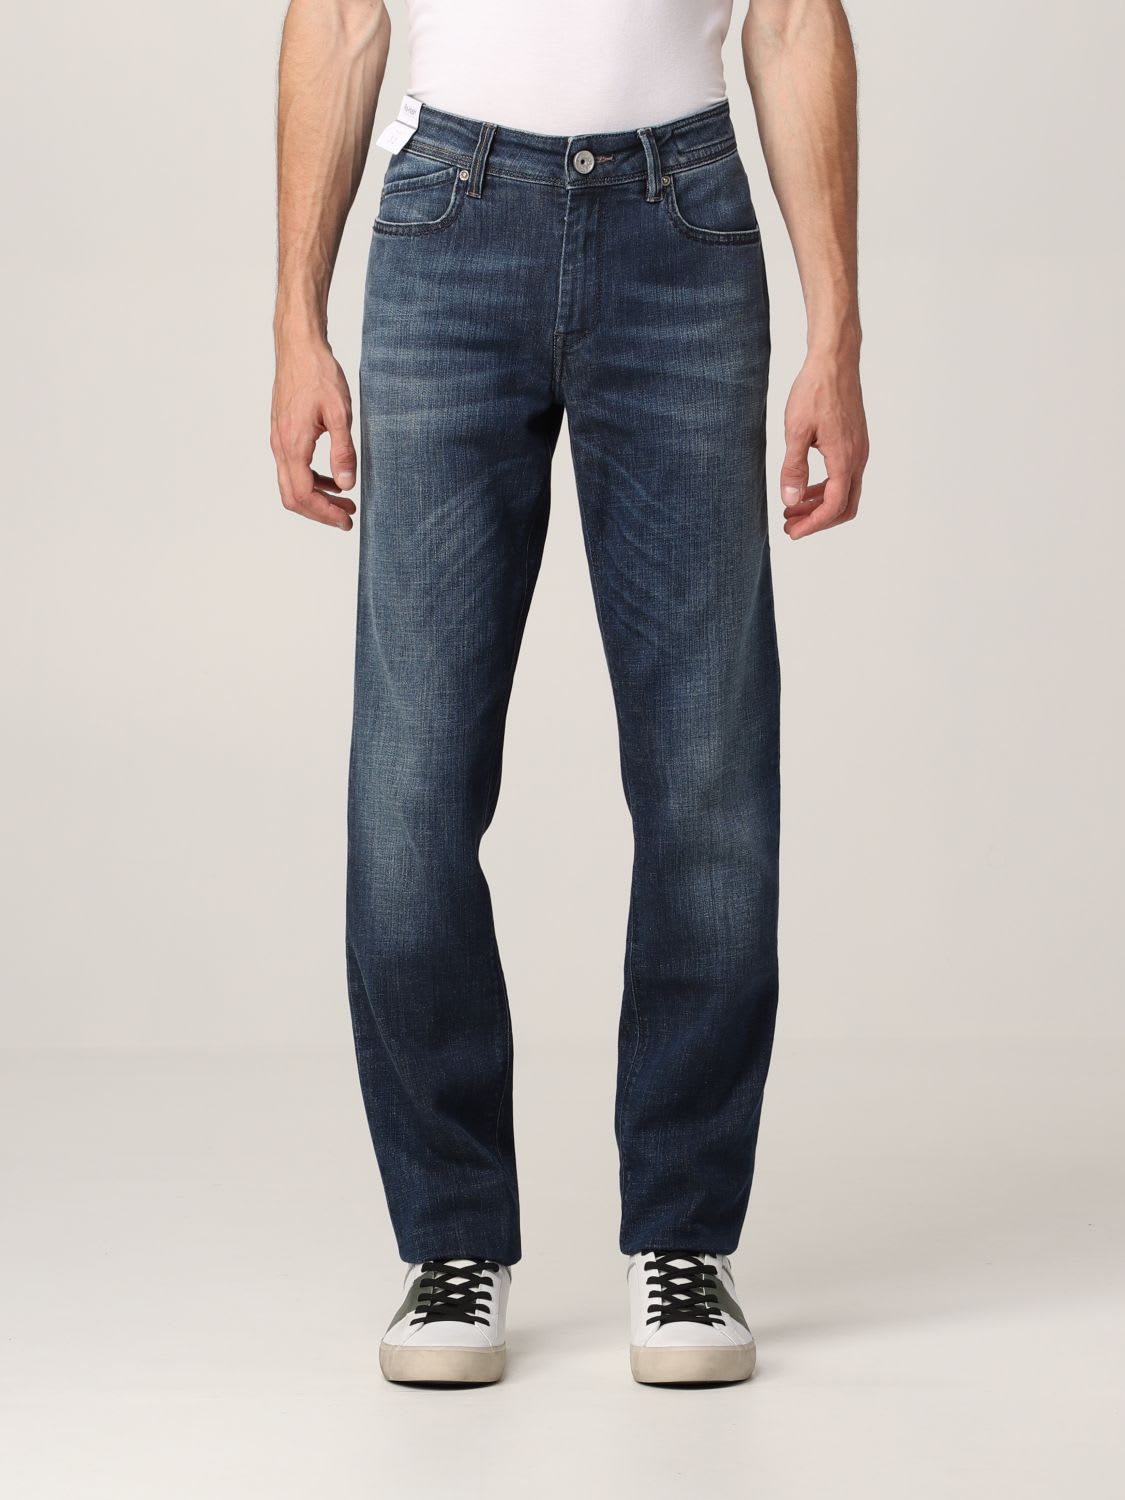 Re-hash Jeans Rubens Re-hash Jeans In Washed Denim